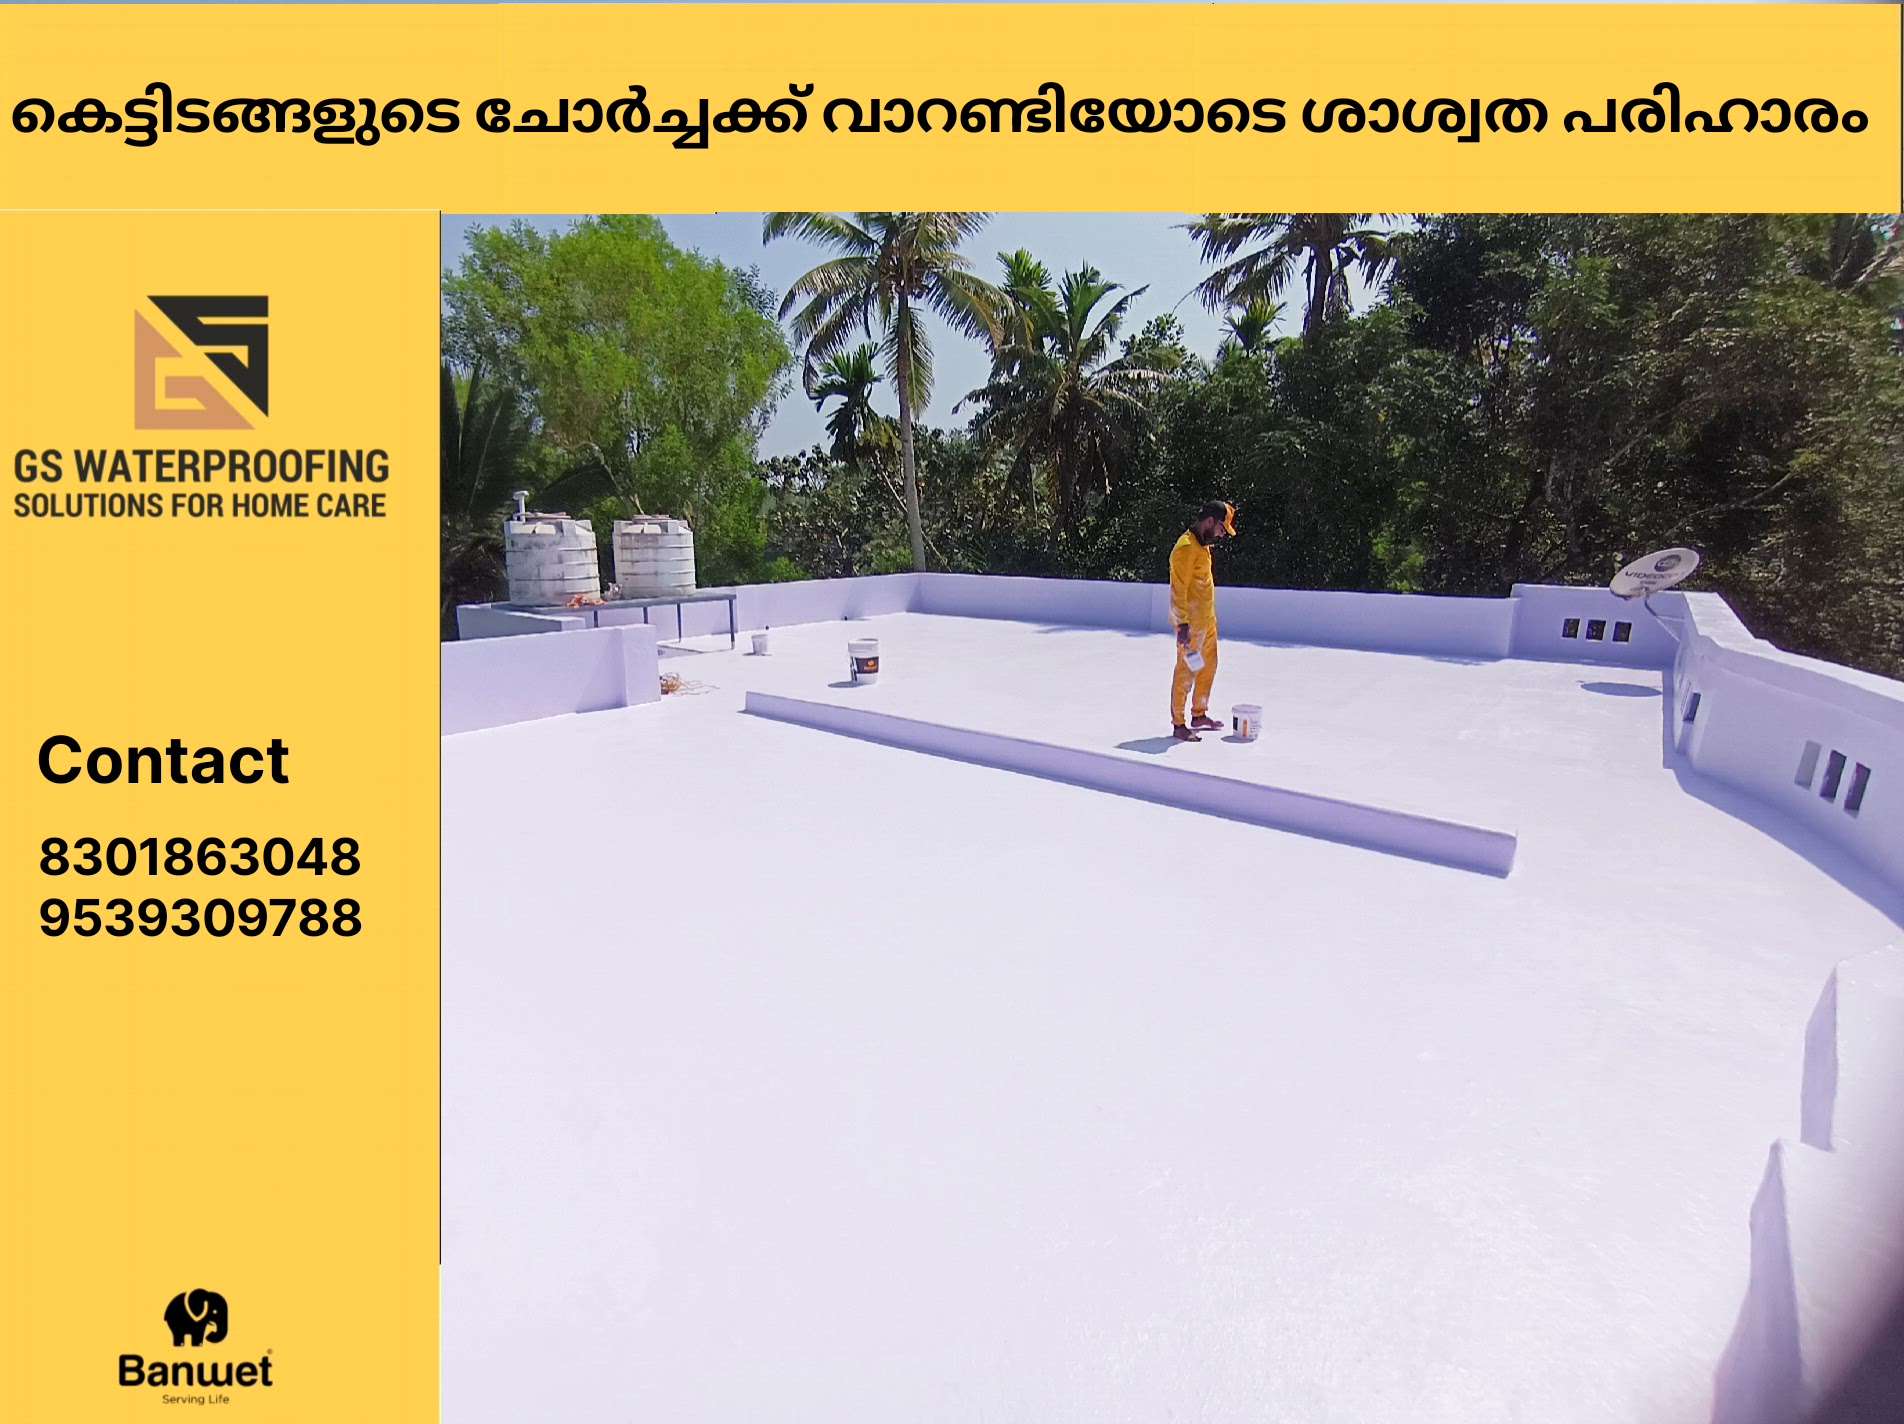 Completed Project
Location : Near Kampisseri mukku, Vallikunnam
Scope of work : #Terrace #Waterproofing
#BANWET 

#German_Water_Proofing #Waterproofing #Paints 

Call us: +918301863048, 9539309788
Mail us: gswaterproofingsolutions@gmail.com

#Waterproofing  &  #Paints

#GS assures you the quality service through the safest hands